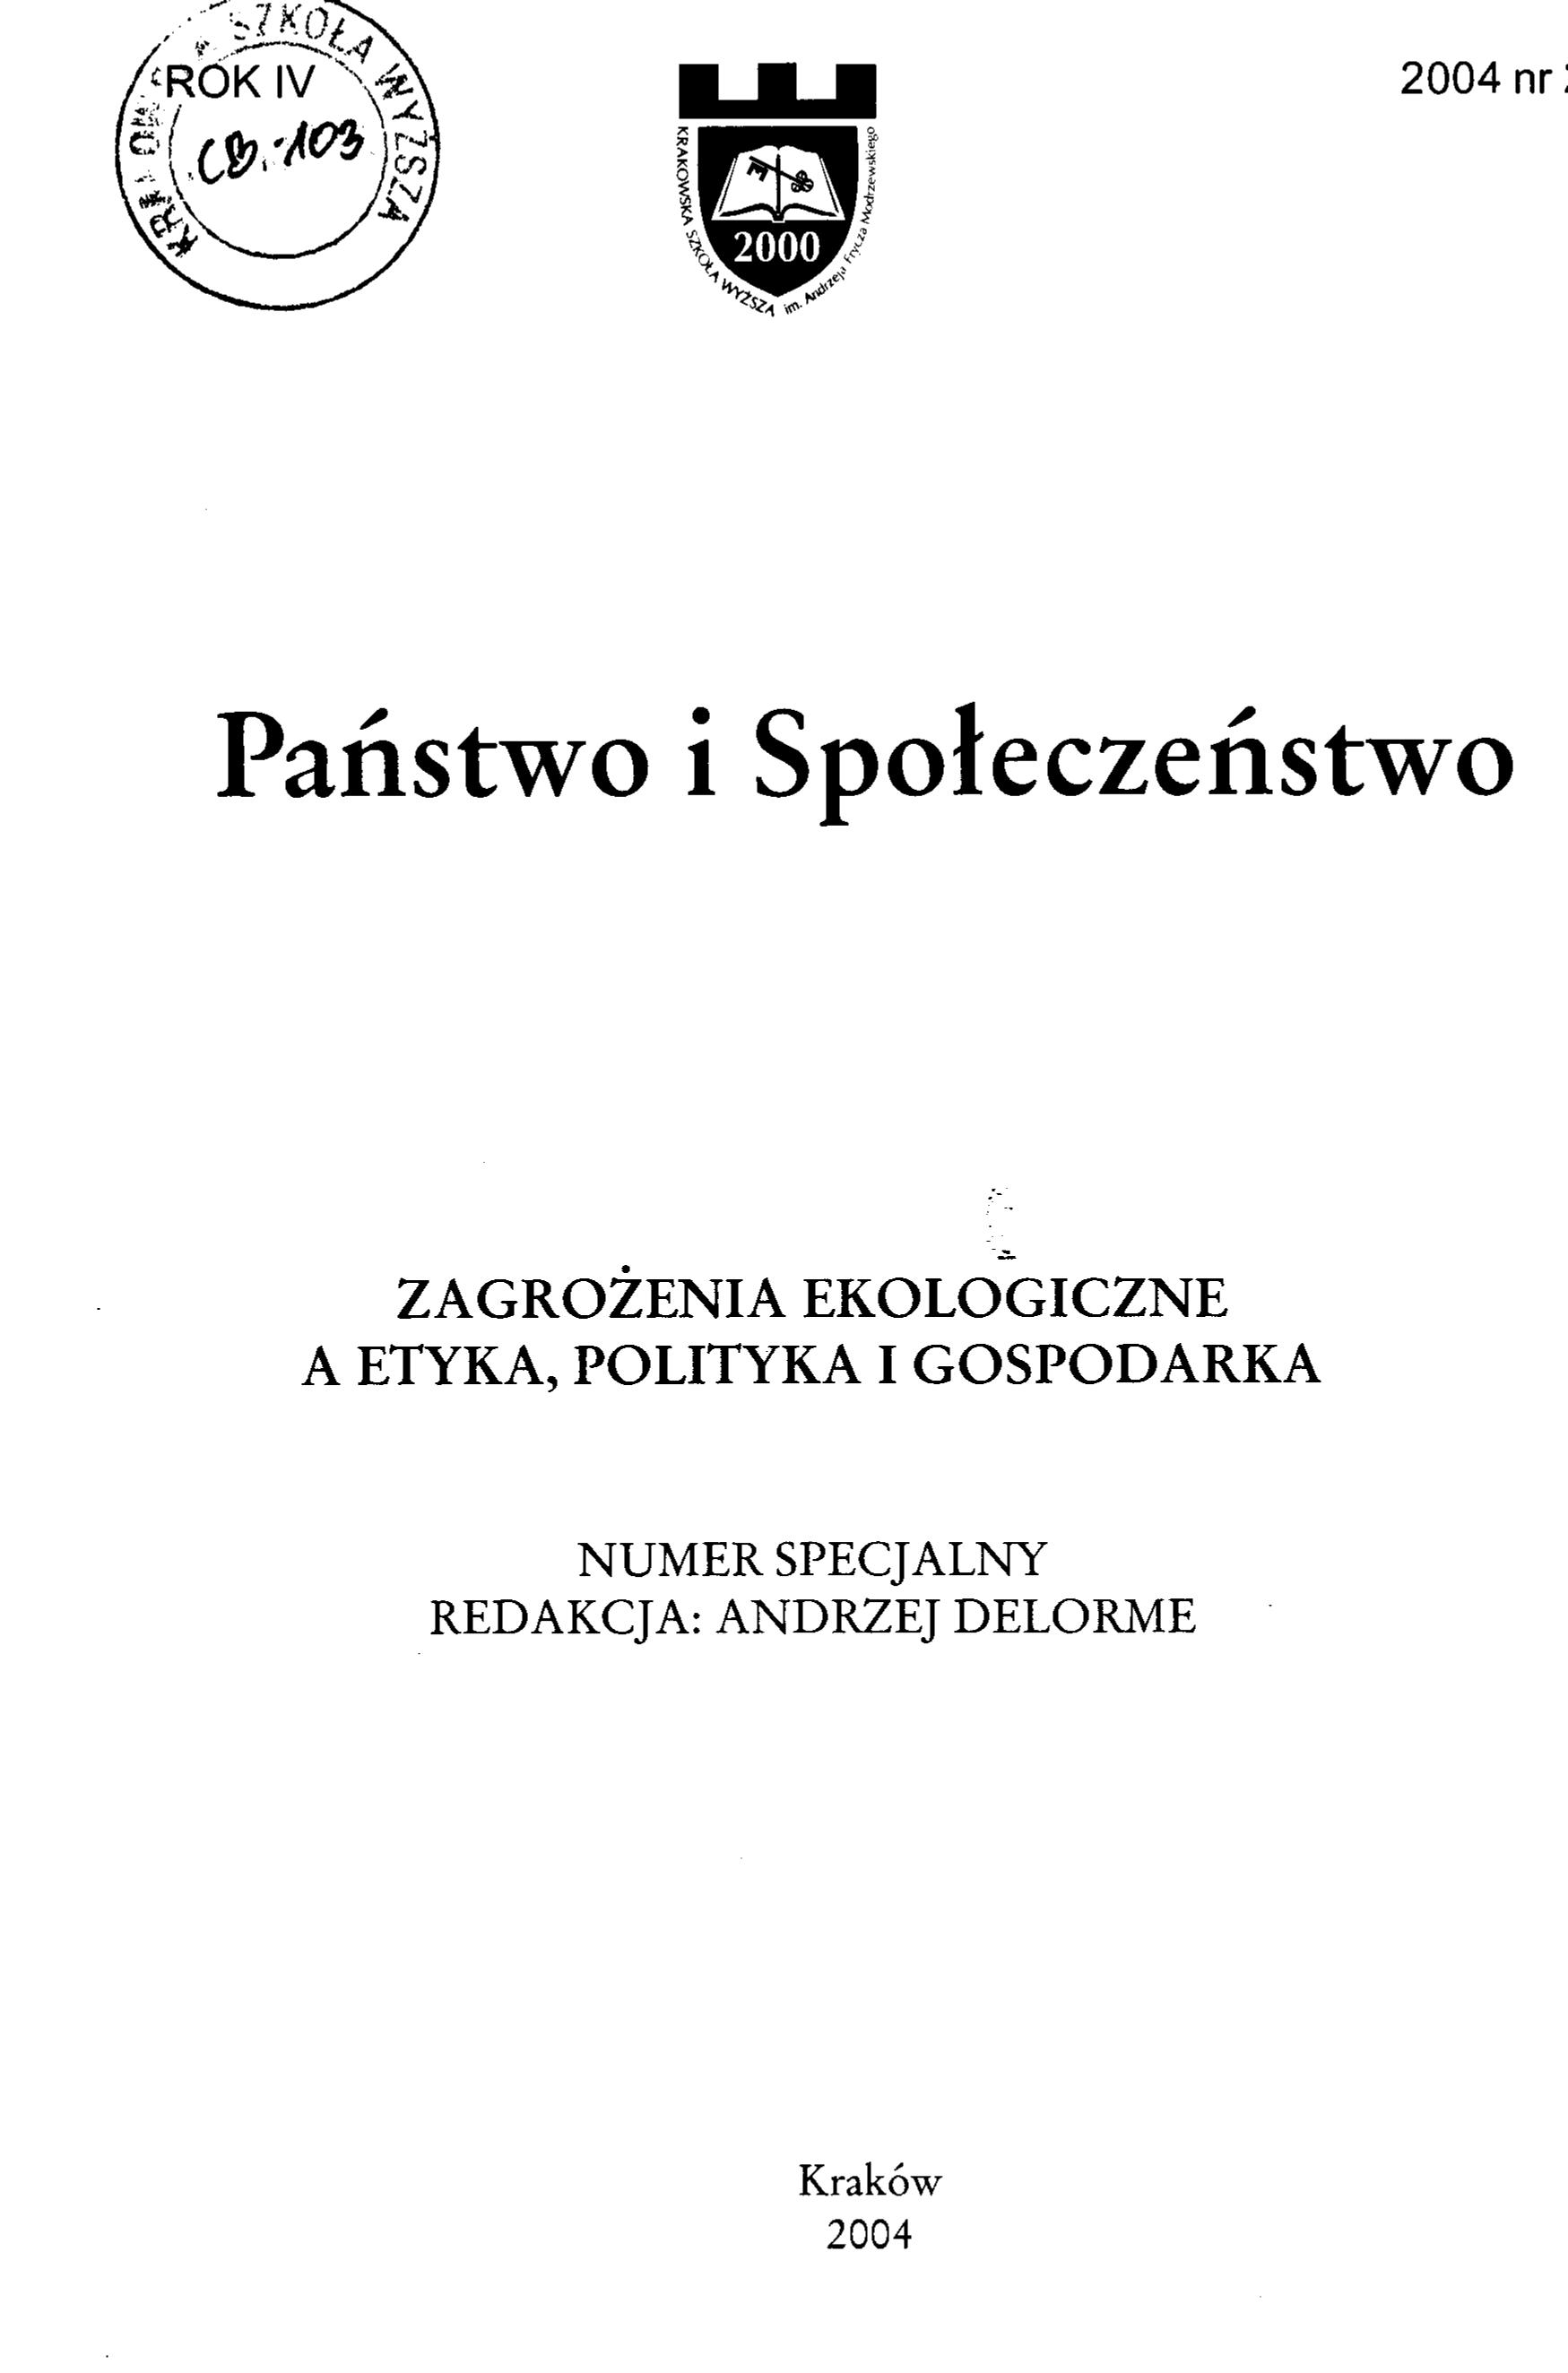 From PZZ to GREENS 2004, i.e. Polish GREENS in the sphere of institutional policy Cover Image